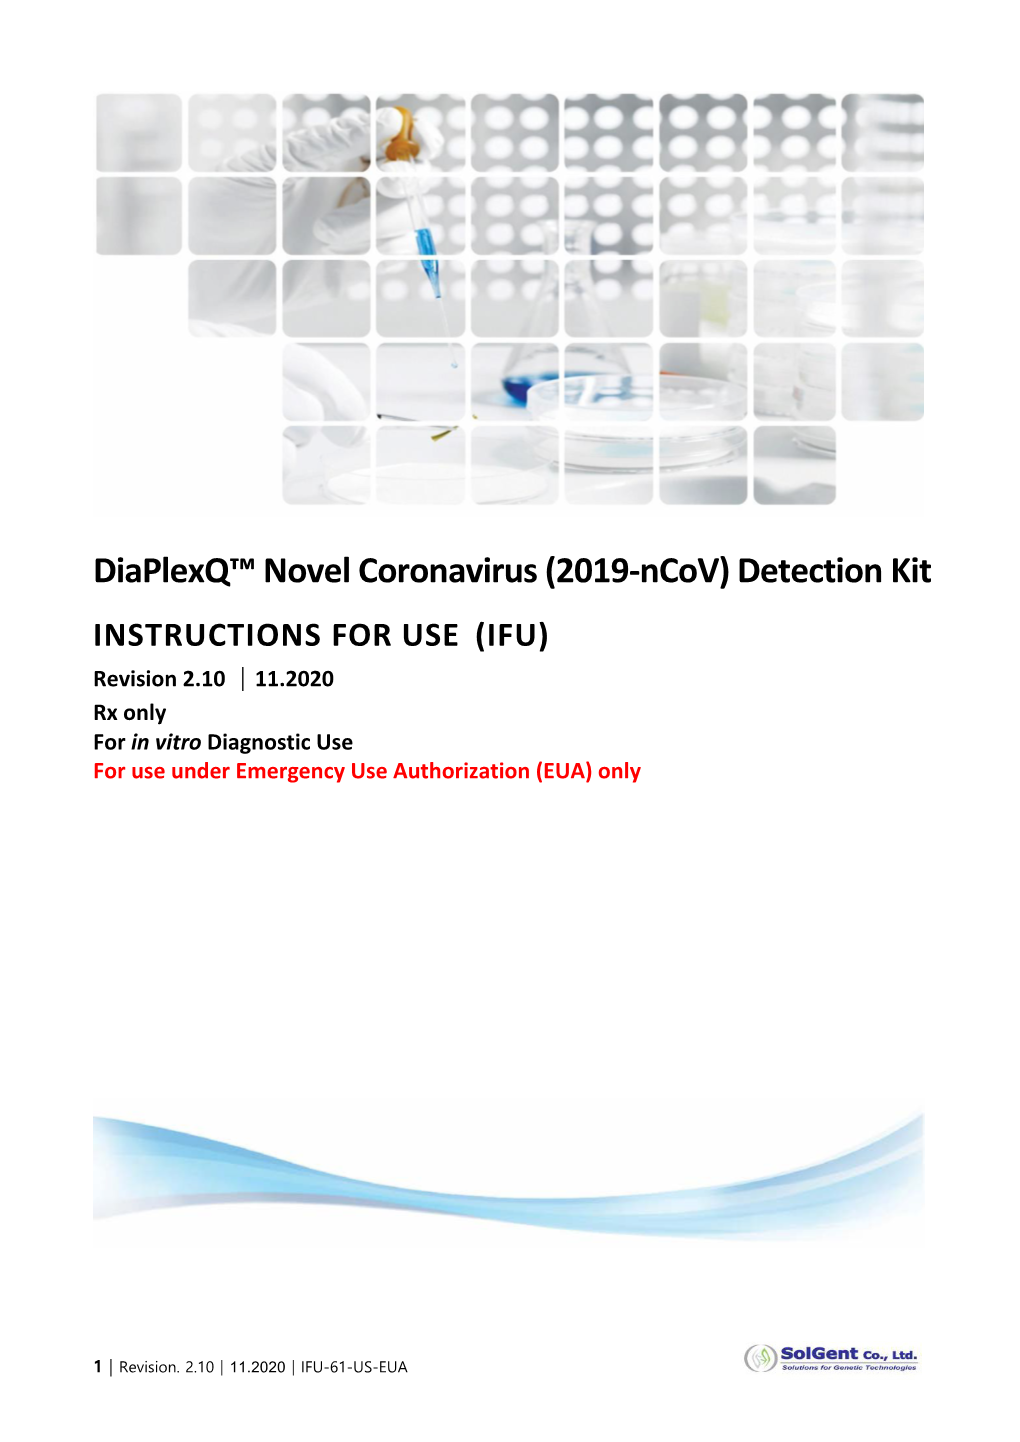 Detection Kit INSTRUCTIONS for USE (IFU) Revision 2.10 │11.2020 Rx Only for in Vitro Diagnostic Use for Use Under Emergency Use Authorization (EUA) Only